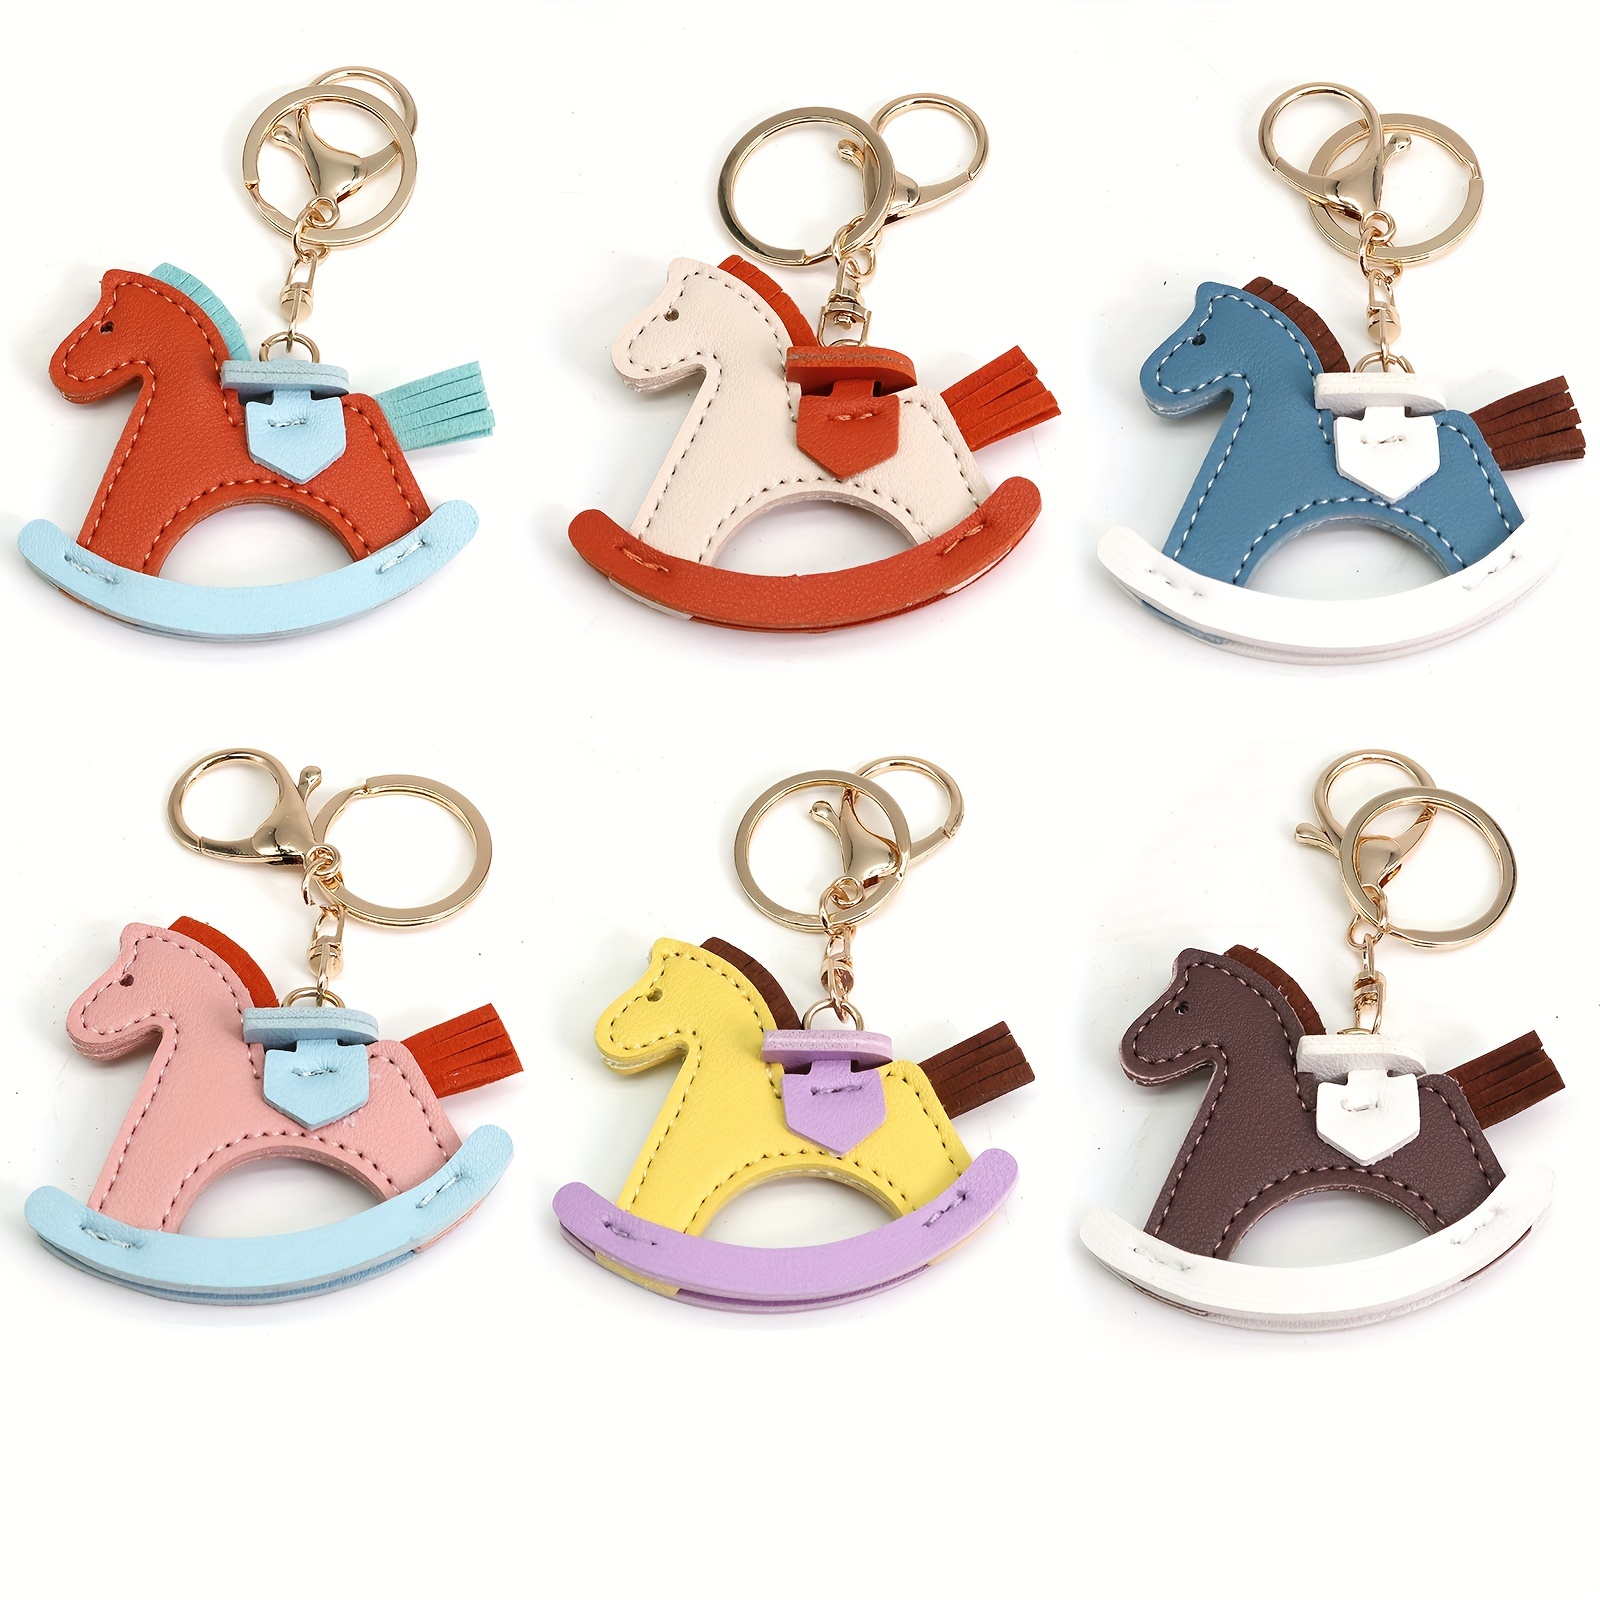 Women Leather Charms Bag Pendant KeyChain Fashion colorful Horses Keyring  Cute Animal Ornament Accessories Decoration Gift - AliExpress